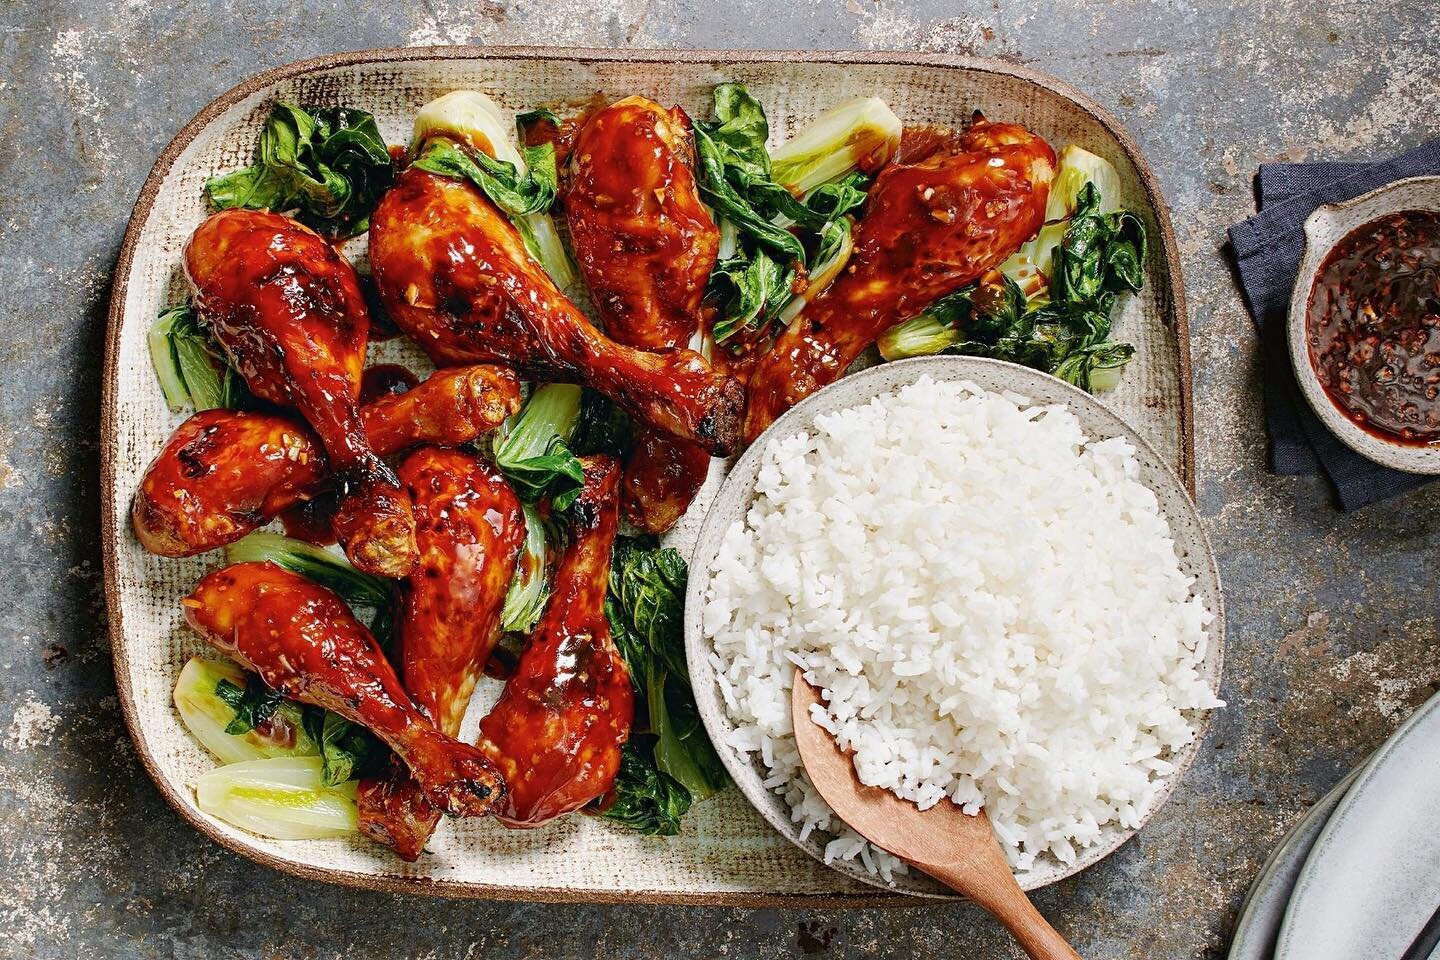 Bok choy is in season and chef @curtisstone has the perfect sticky chicken drumsticks with rice and bok choy recipe just for you. You will need to pick up your Cook With Curtis measuring cups, chopping board, santoku knife, tongs and all of the ingre